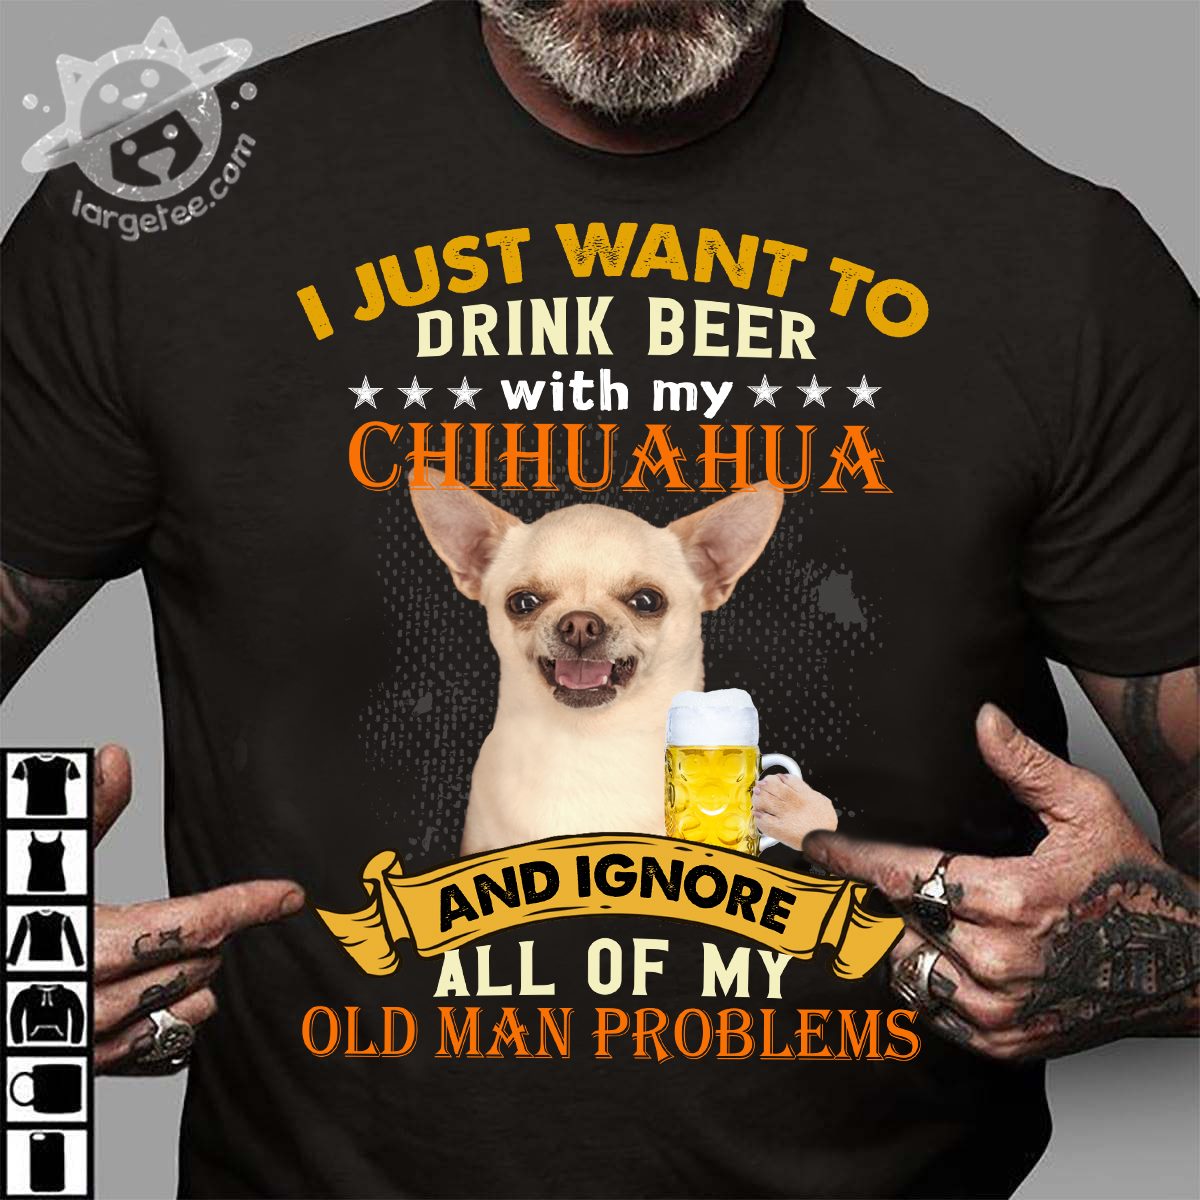 I just want to drink beer with my Chihuahua and ignore all of my old man problems